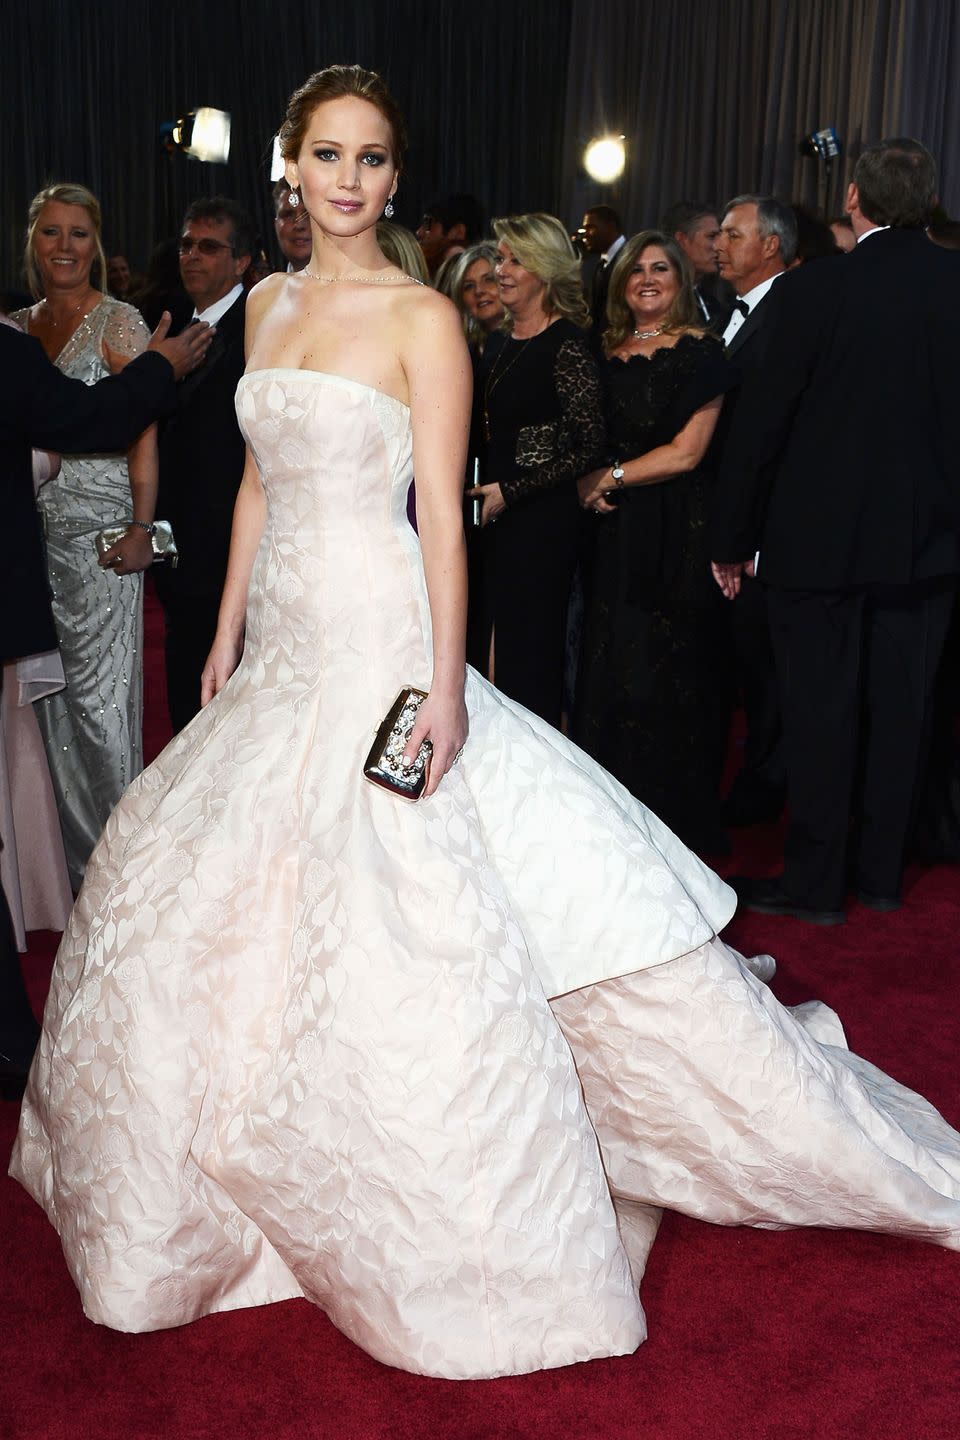 Wedding dress inspiration from the red carpet